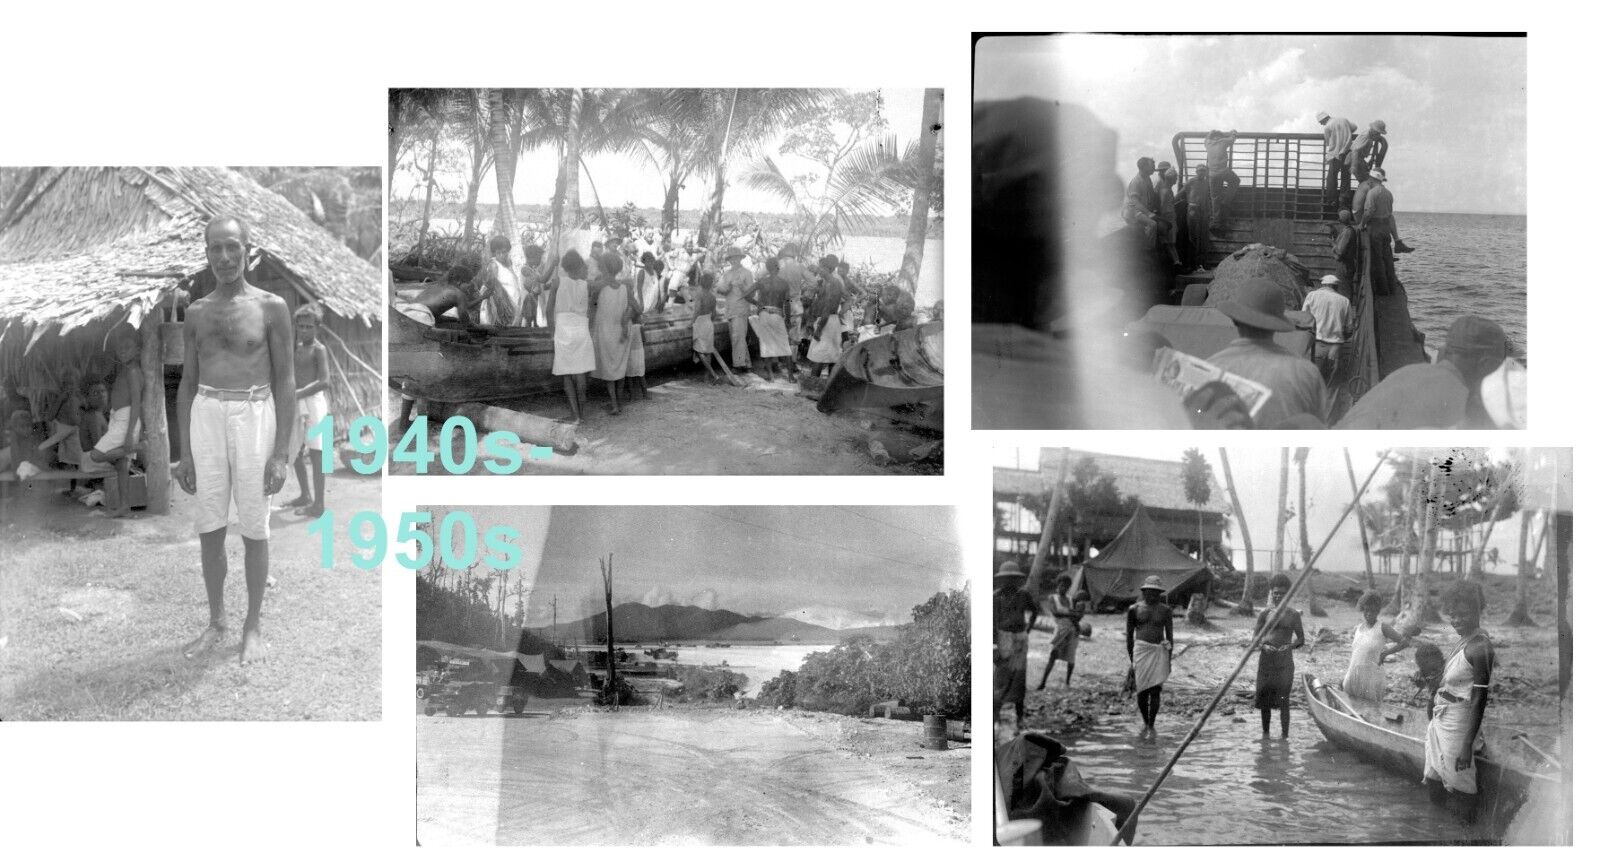 LOT 1940s - 50s Africa Boats People Huts Trucks Old Photos Vintage NEGATIVES